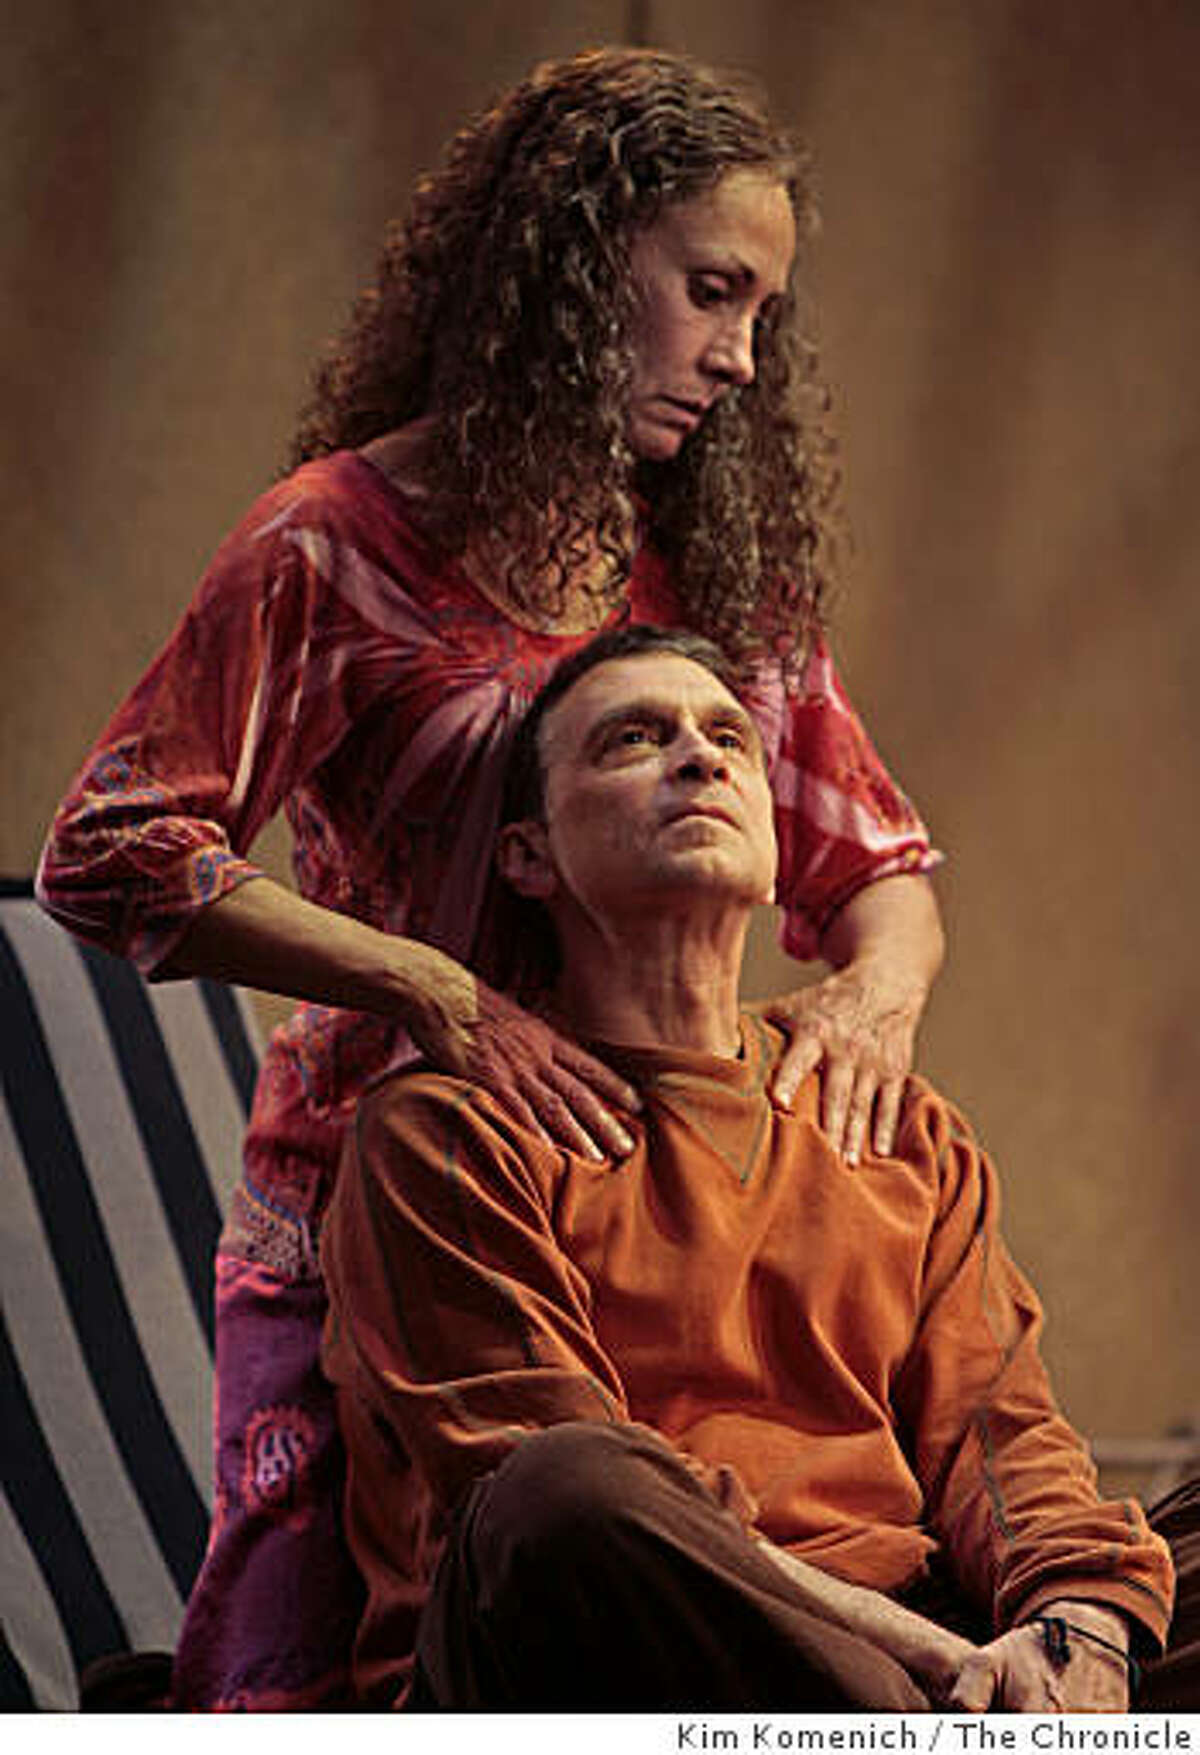 Laurie Metcalf and Dennis Boutsikaris perform in "The Quality of Life" at the American Conservatory Theater in San Francisco, Calif., on Friday, Oct. 24, 2008.